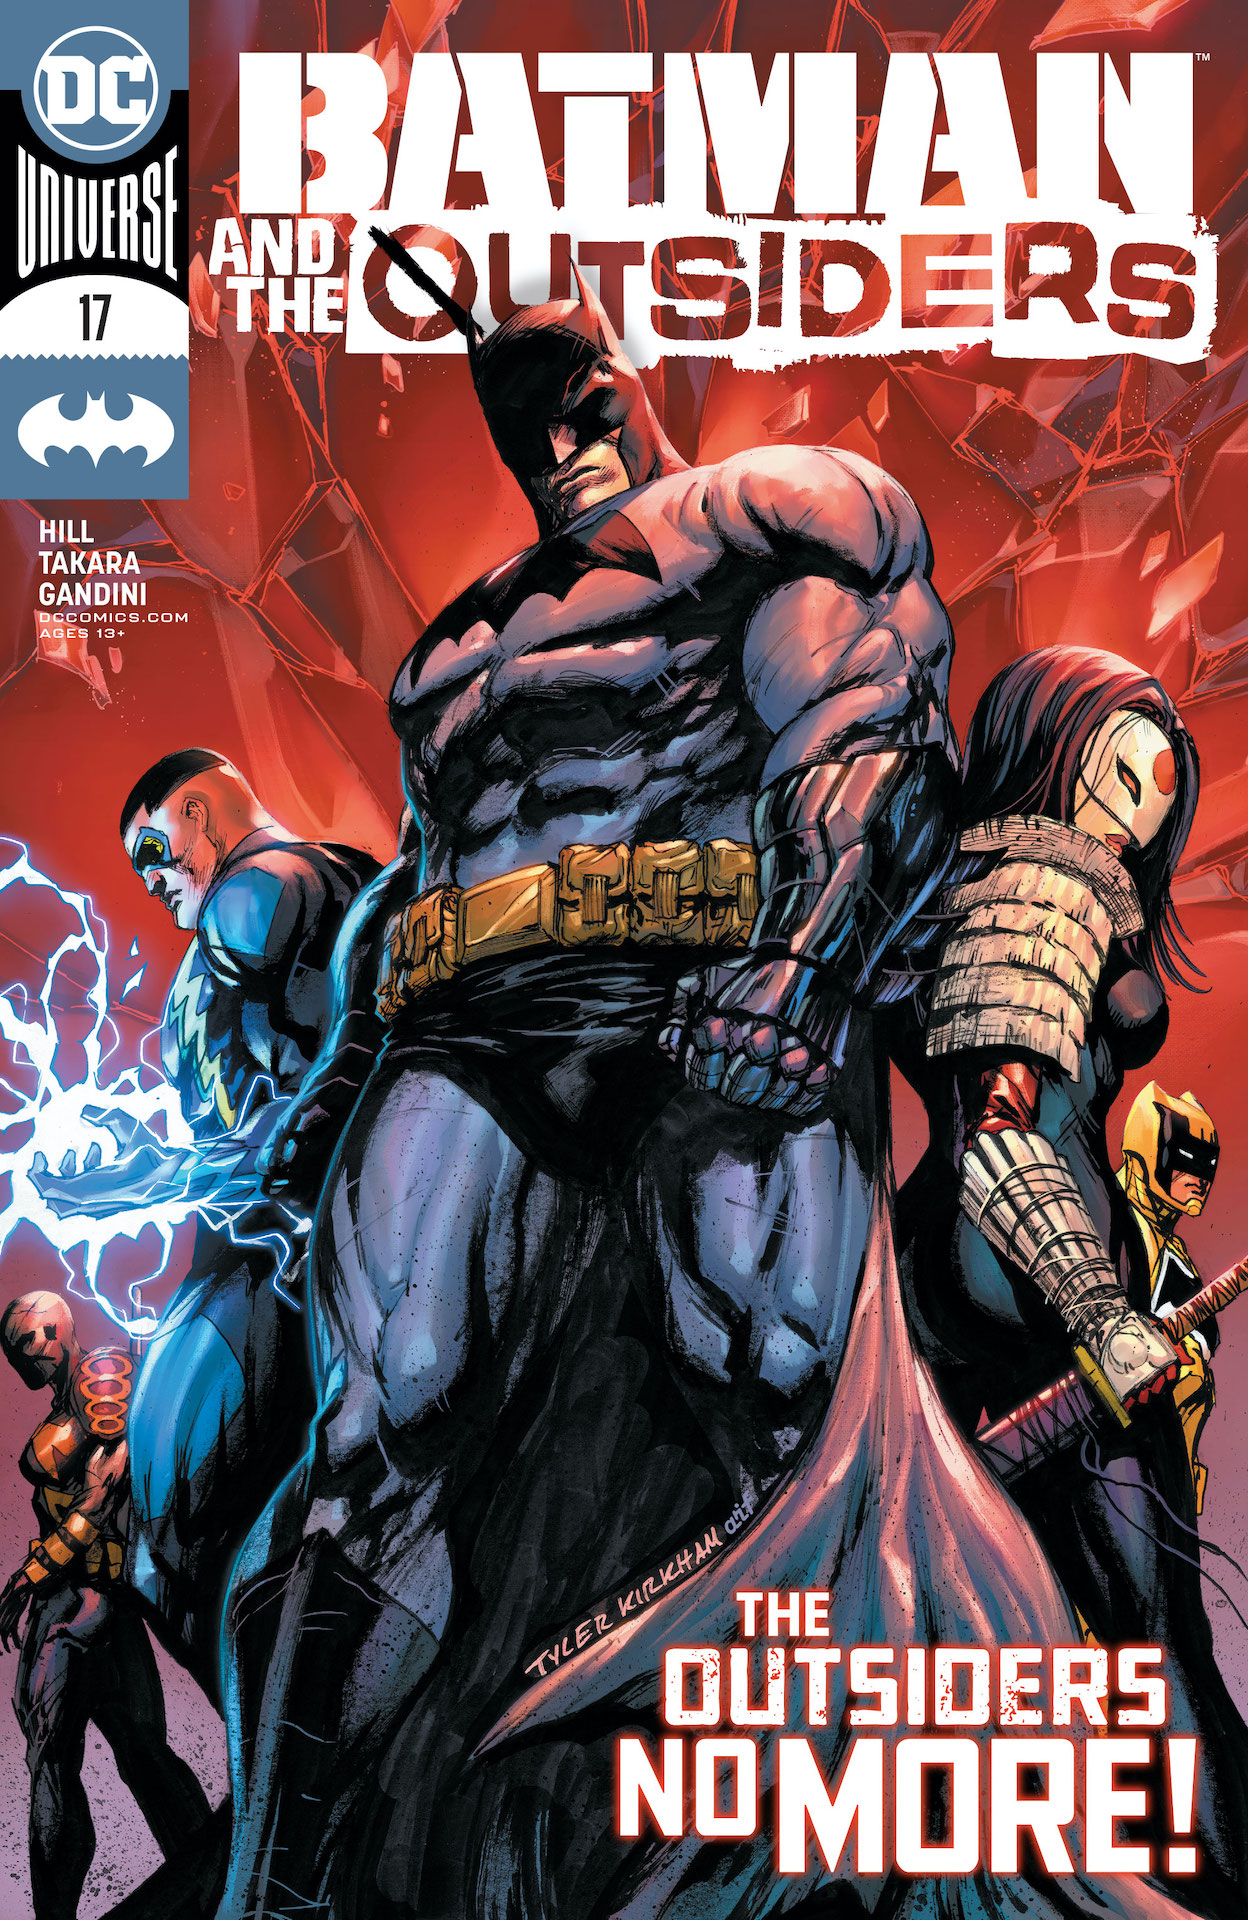 Batman and the Outsiders #17